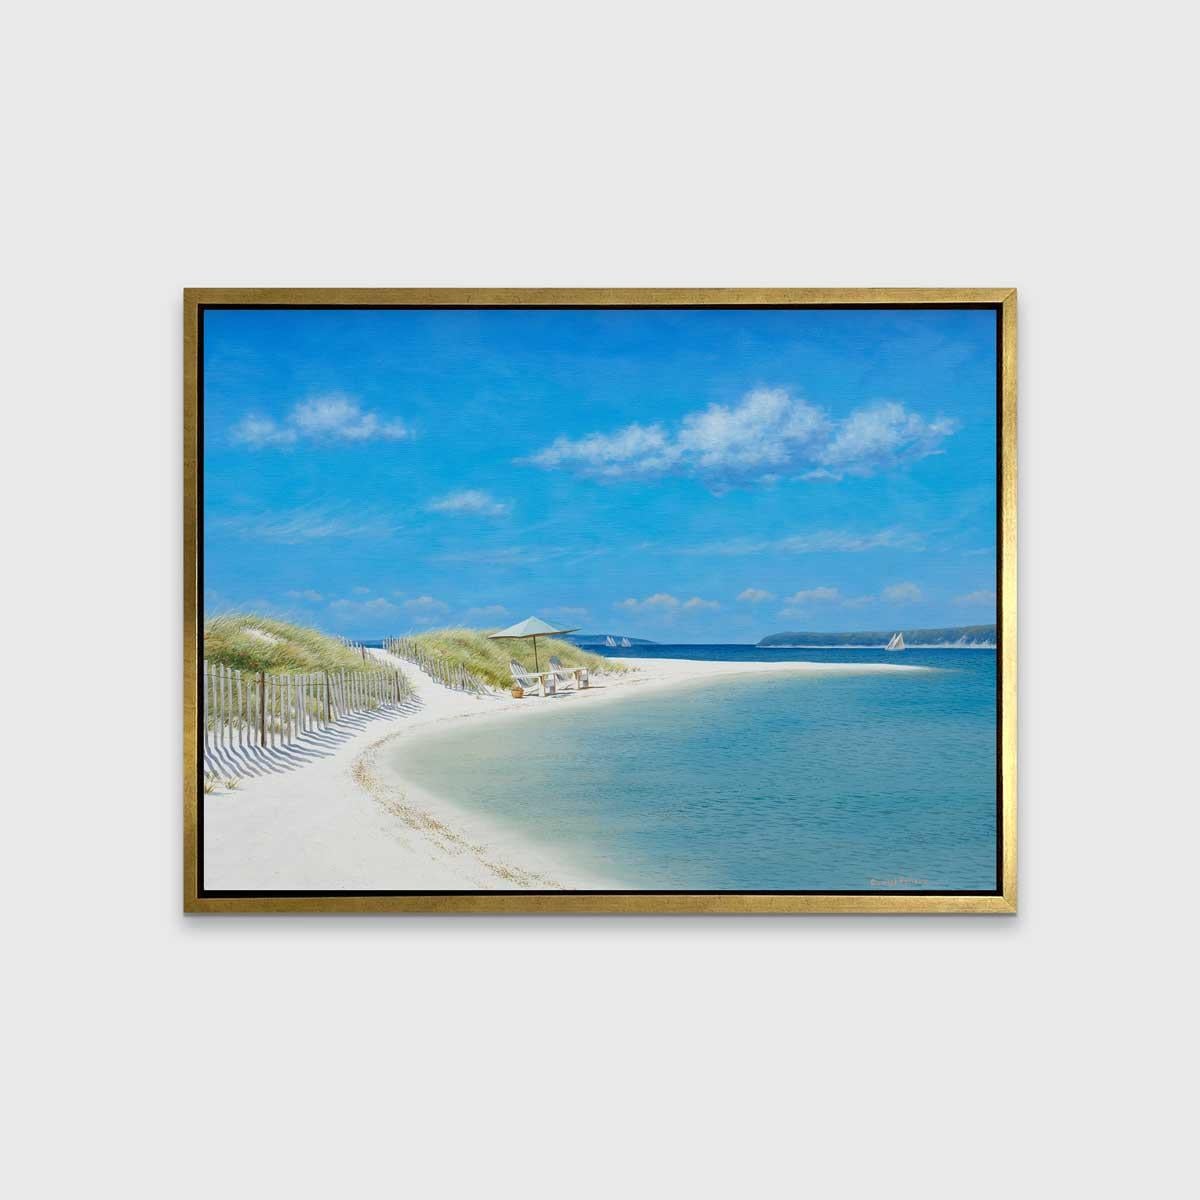 This Limited Edition print by Daniel Pollera is a contemporary realist landscape which depicts a sandy beach lined with wooden fencing. The beach bows inward, with two Adirondack chairs and a beach umbrella facing right, looking out to the water.